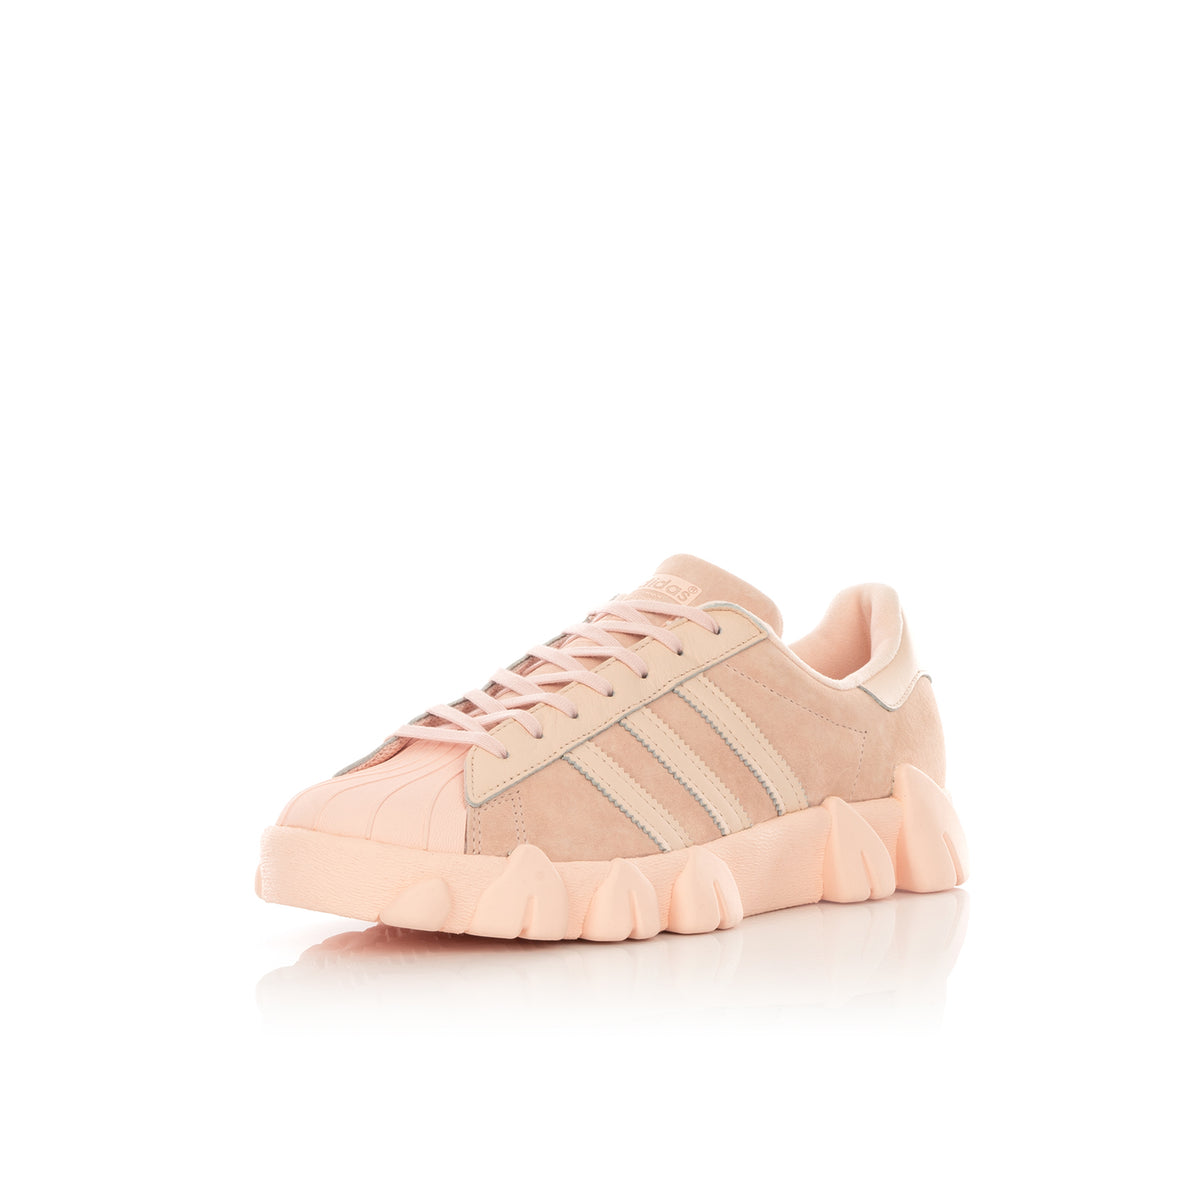 adidas by Angel Chen | Superstar 80's Ice Pink - FY5351 - Concrete